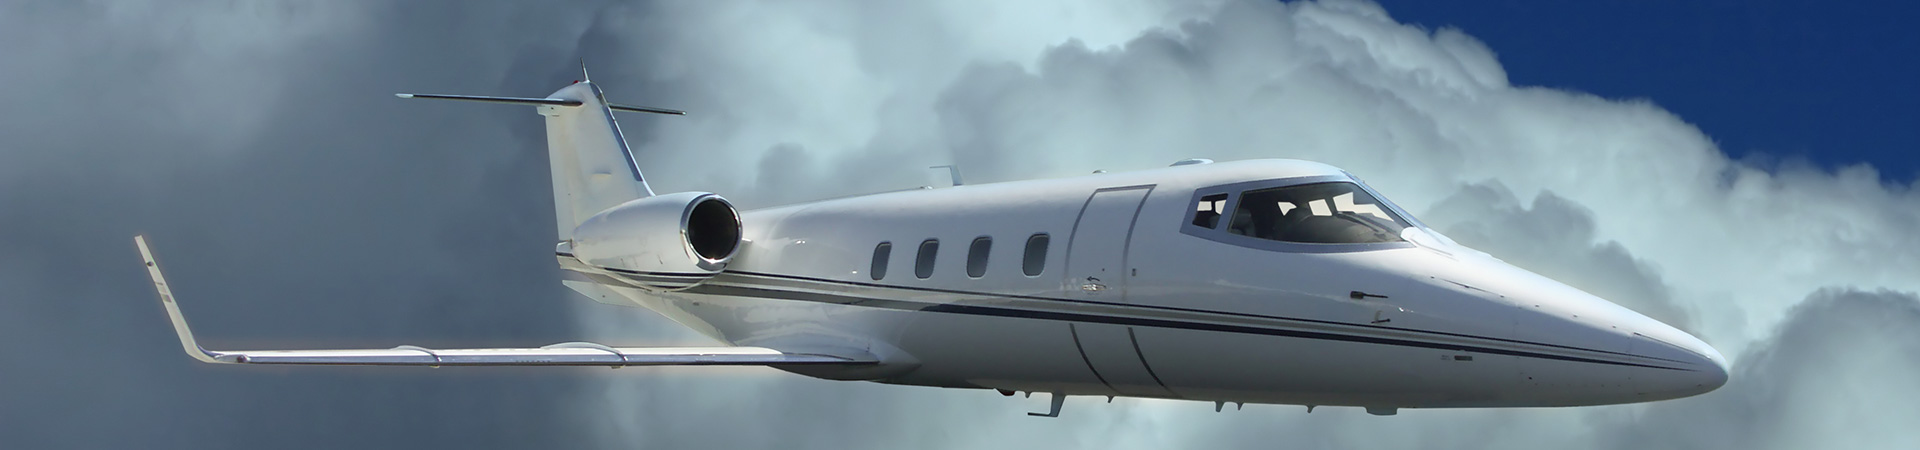 Starr Luxury Jets Small Private Jet Aircraft Hire